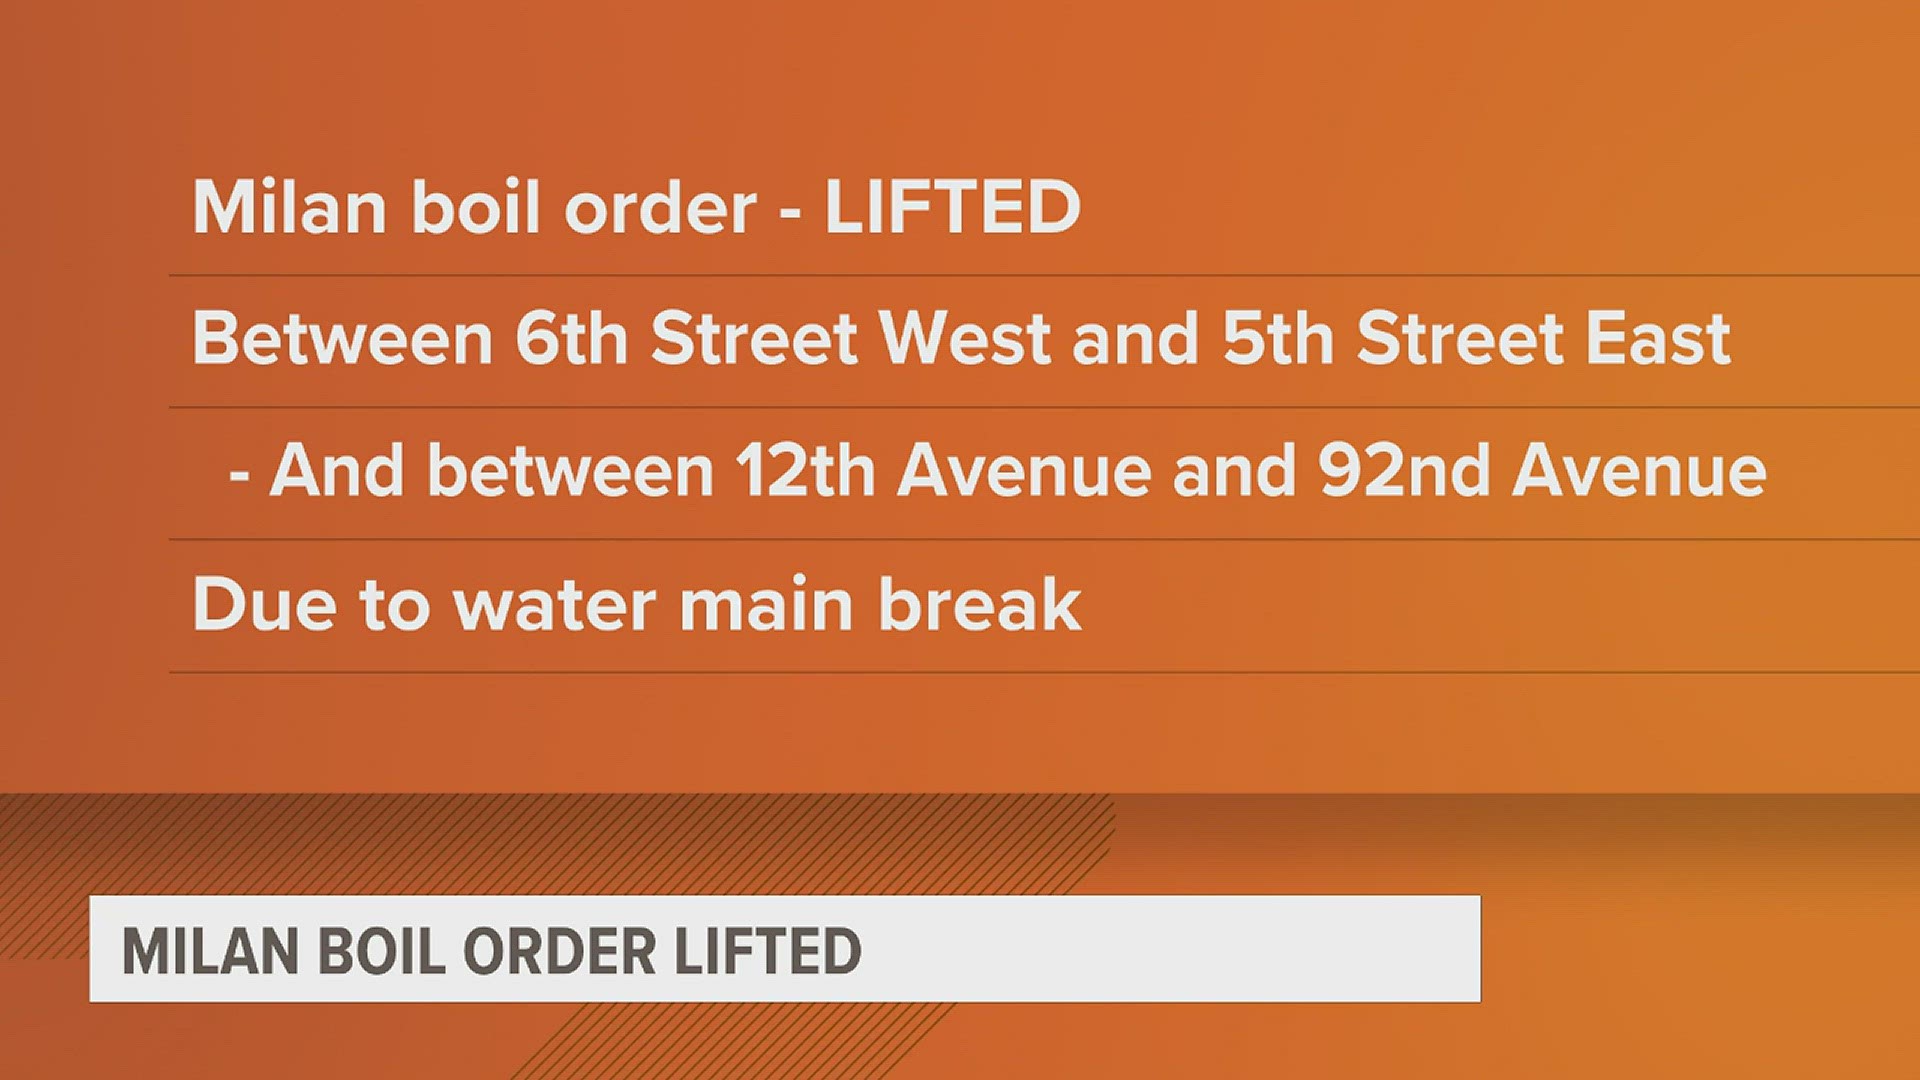 The boil order previously in place affected residents between 6th Street West, 5th Street East, 12th and 92nd Avenues. Water in this area is now safe for daily use.